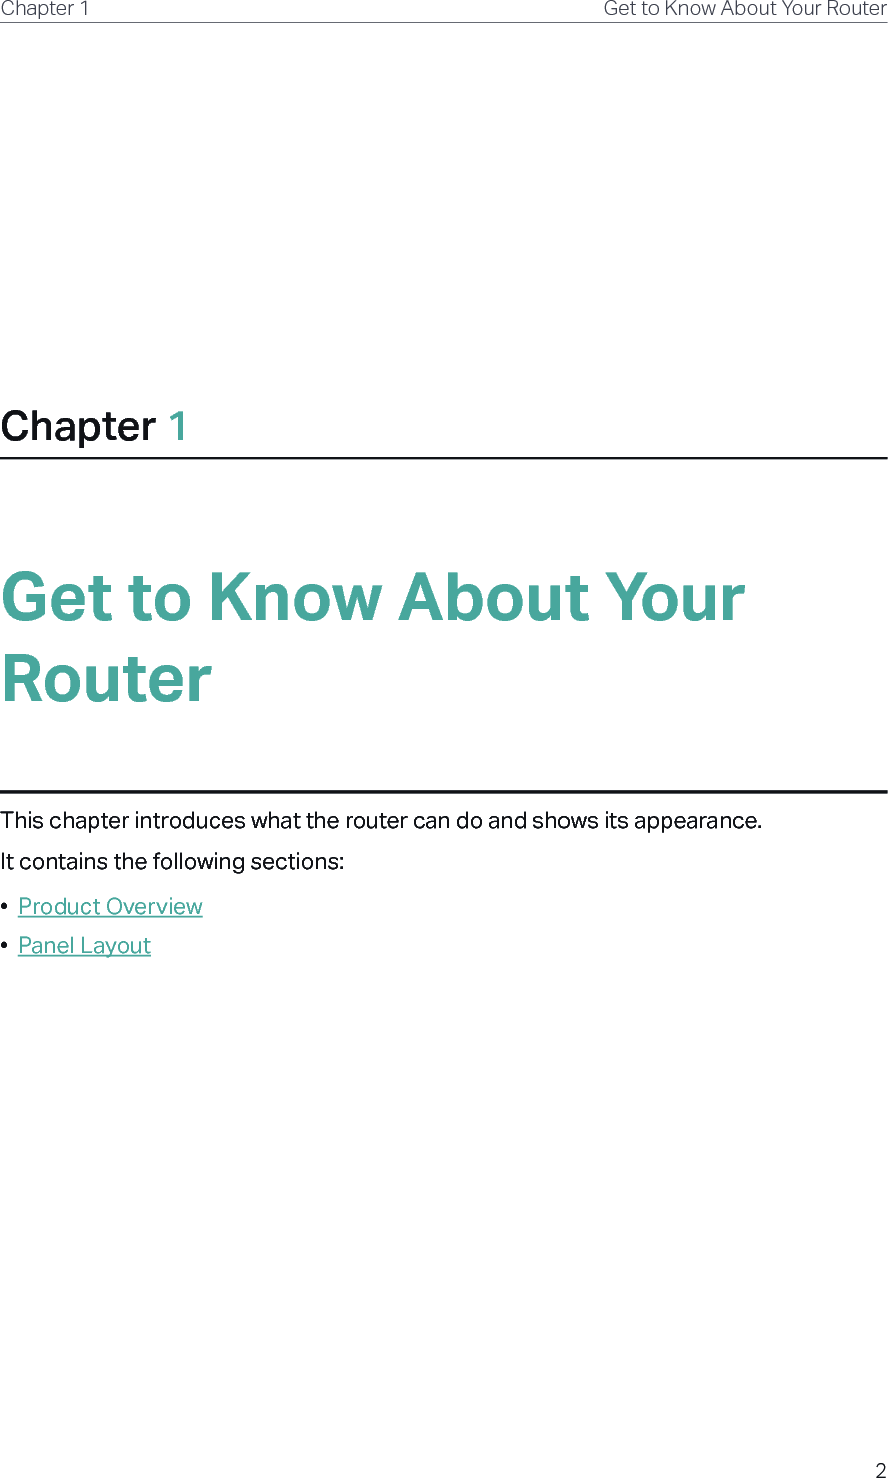 2Chapter 1 Get to Know About Your RouterChapter 1Get to Know About Your RouterThis chapter introduces what the router can do and shows its appearance. It contains the following sections:•  Product Overview•  Panel Layout